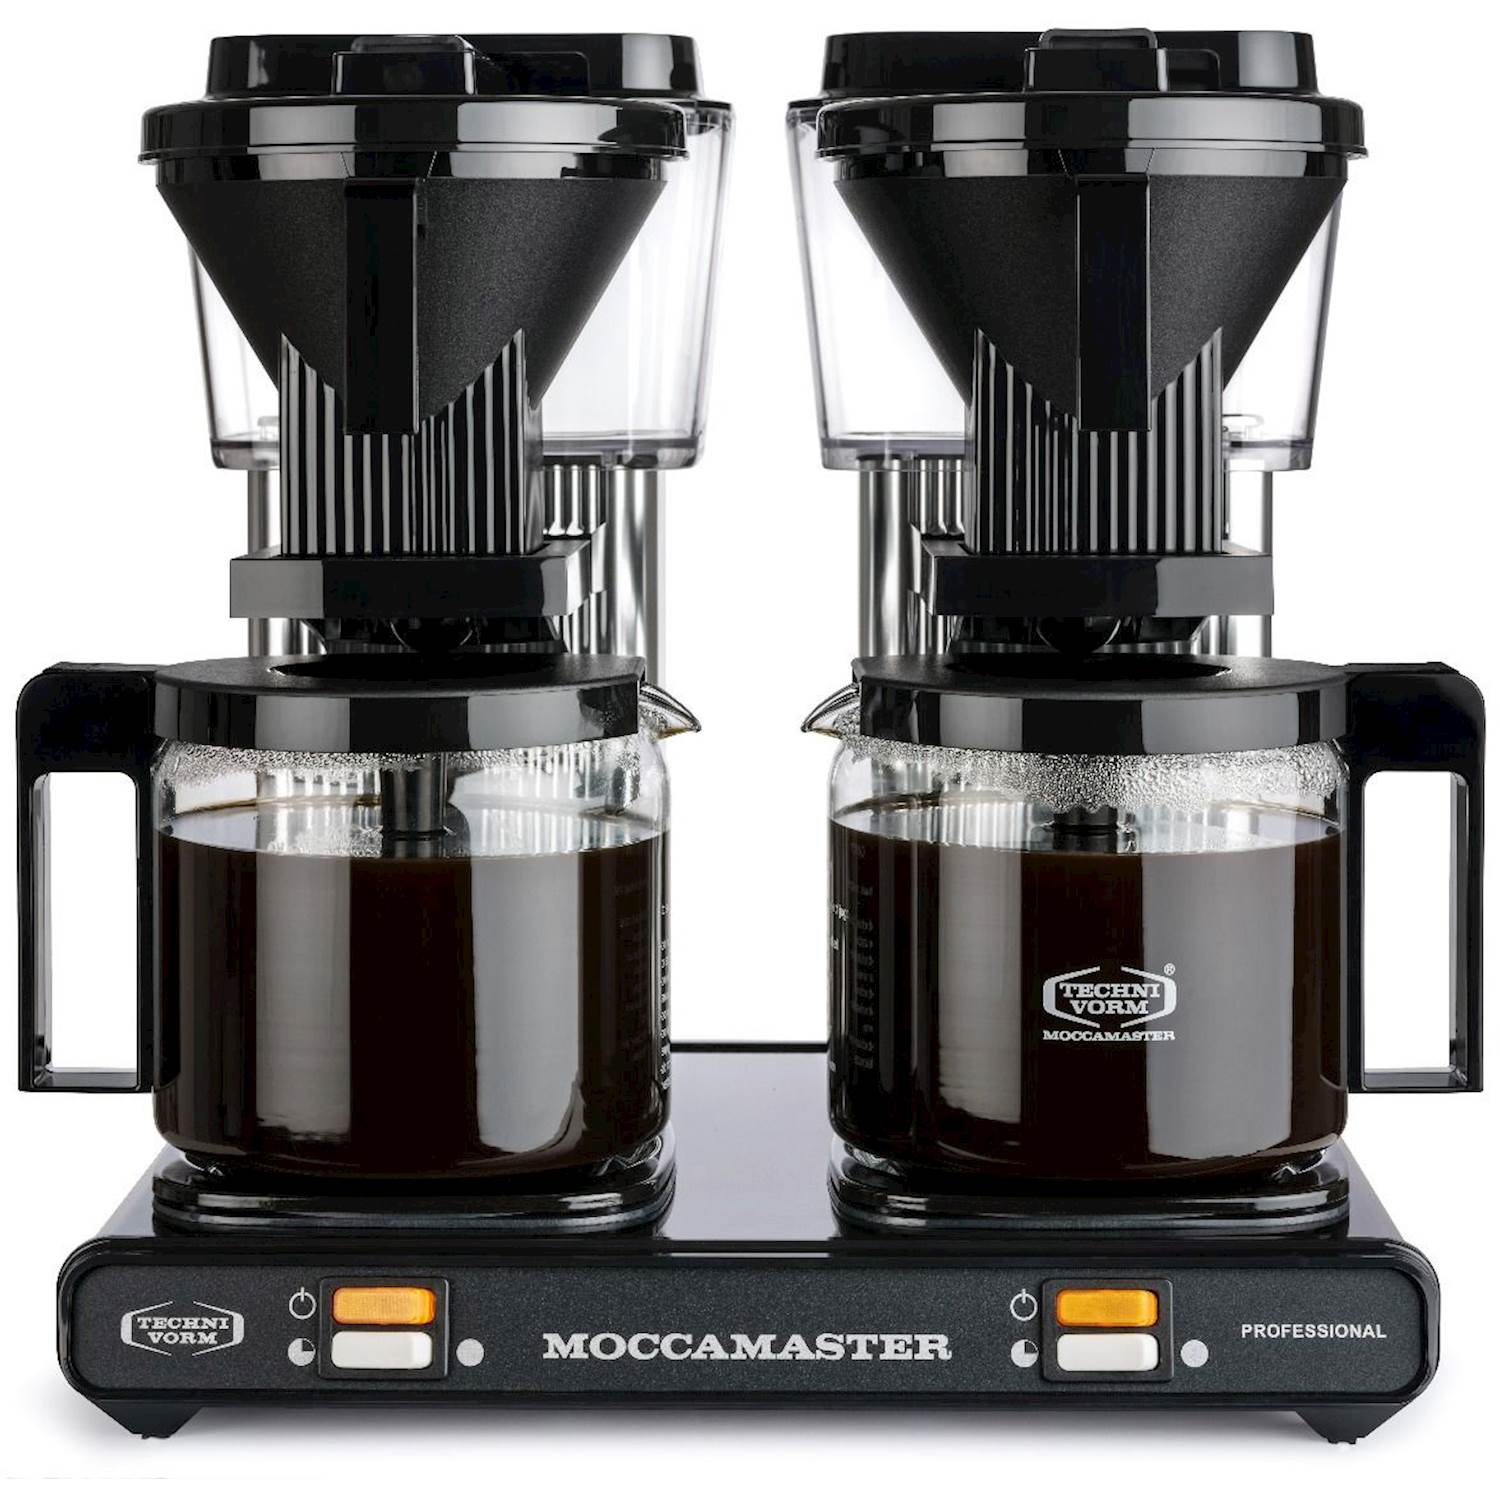 Moccamaster Professional Double